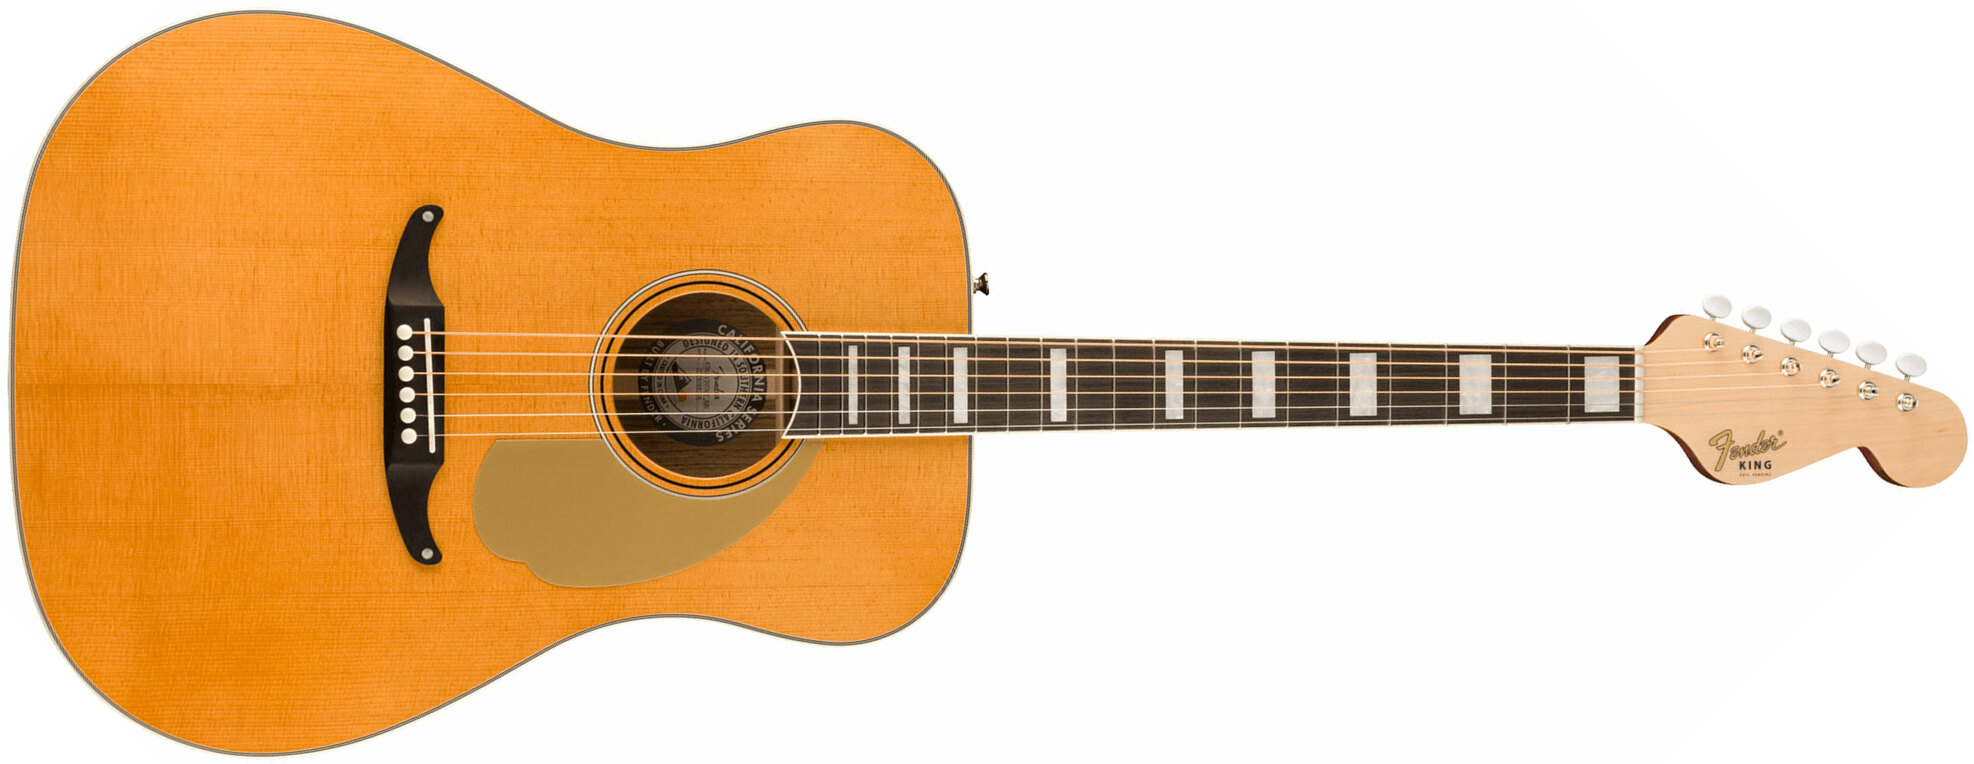 Fender King Vintage California Dreadnought Epicea Ovangkol Ova - Aged Natural - Guitare Electro Acoustique - Main picture